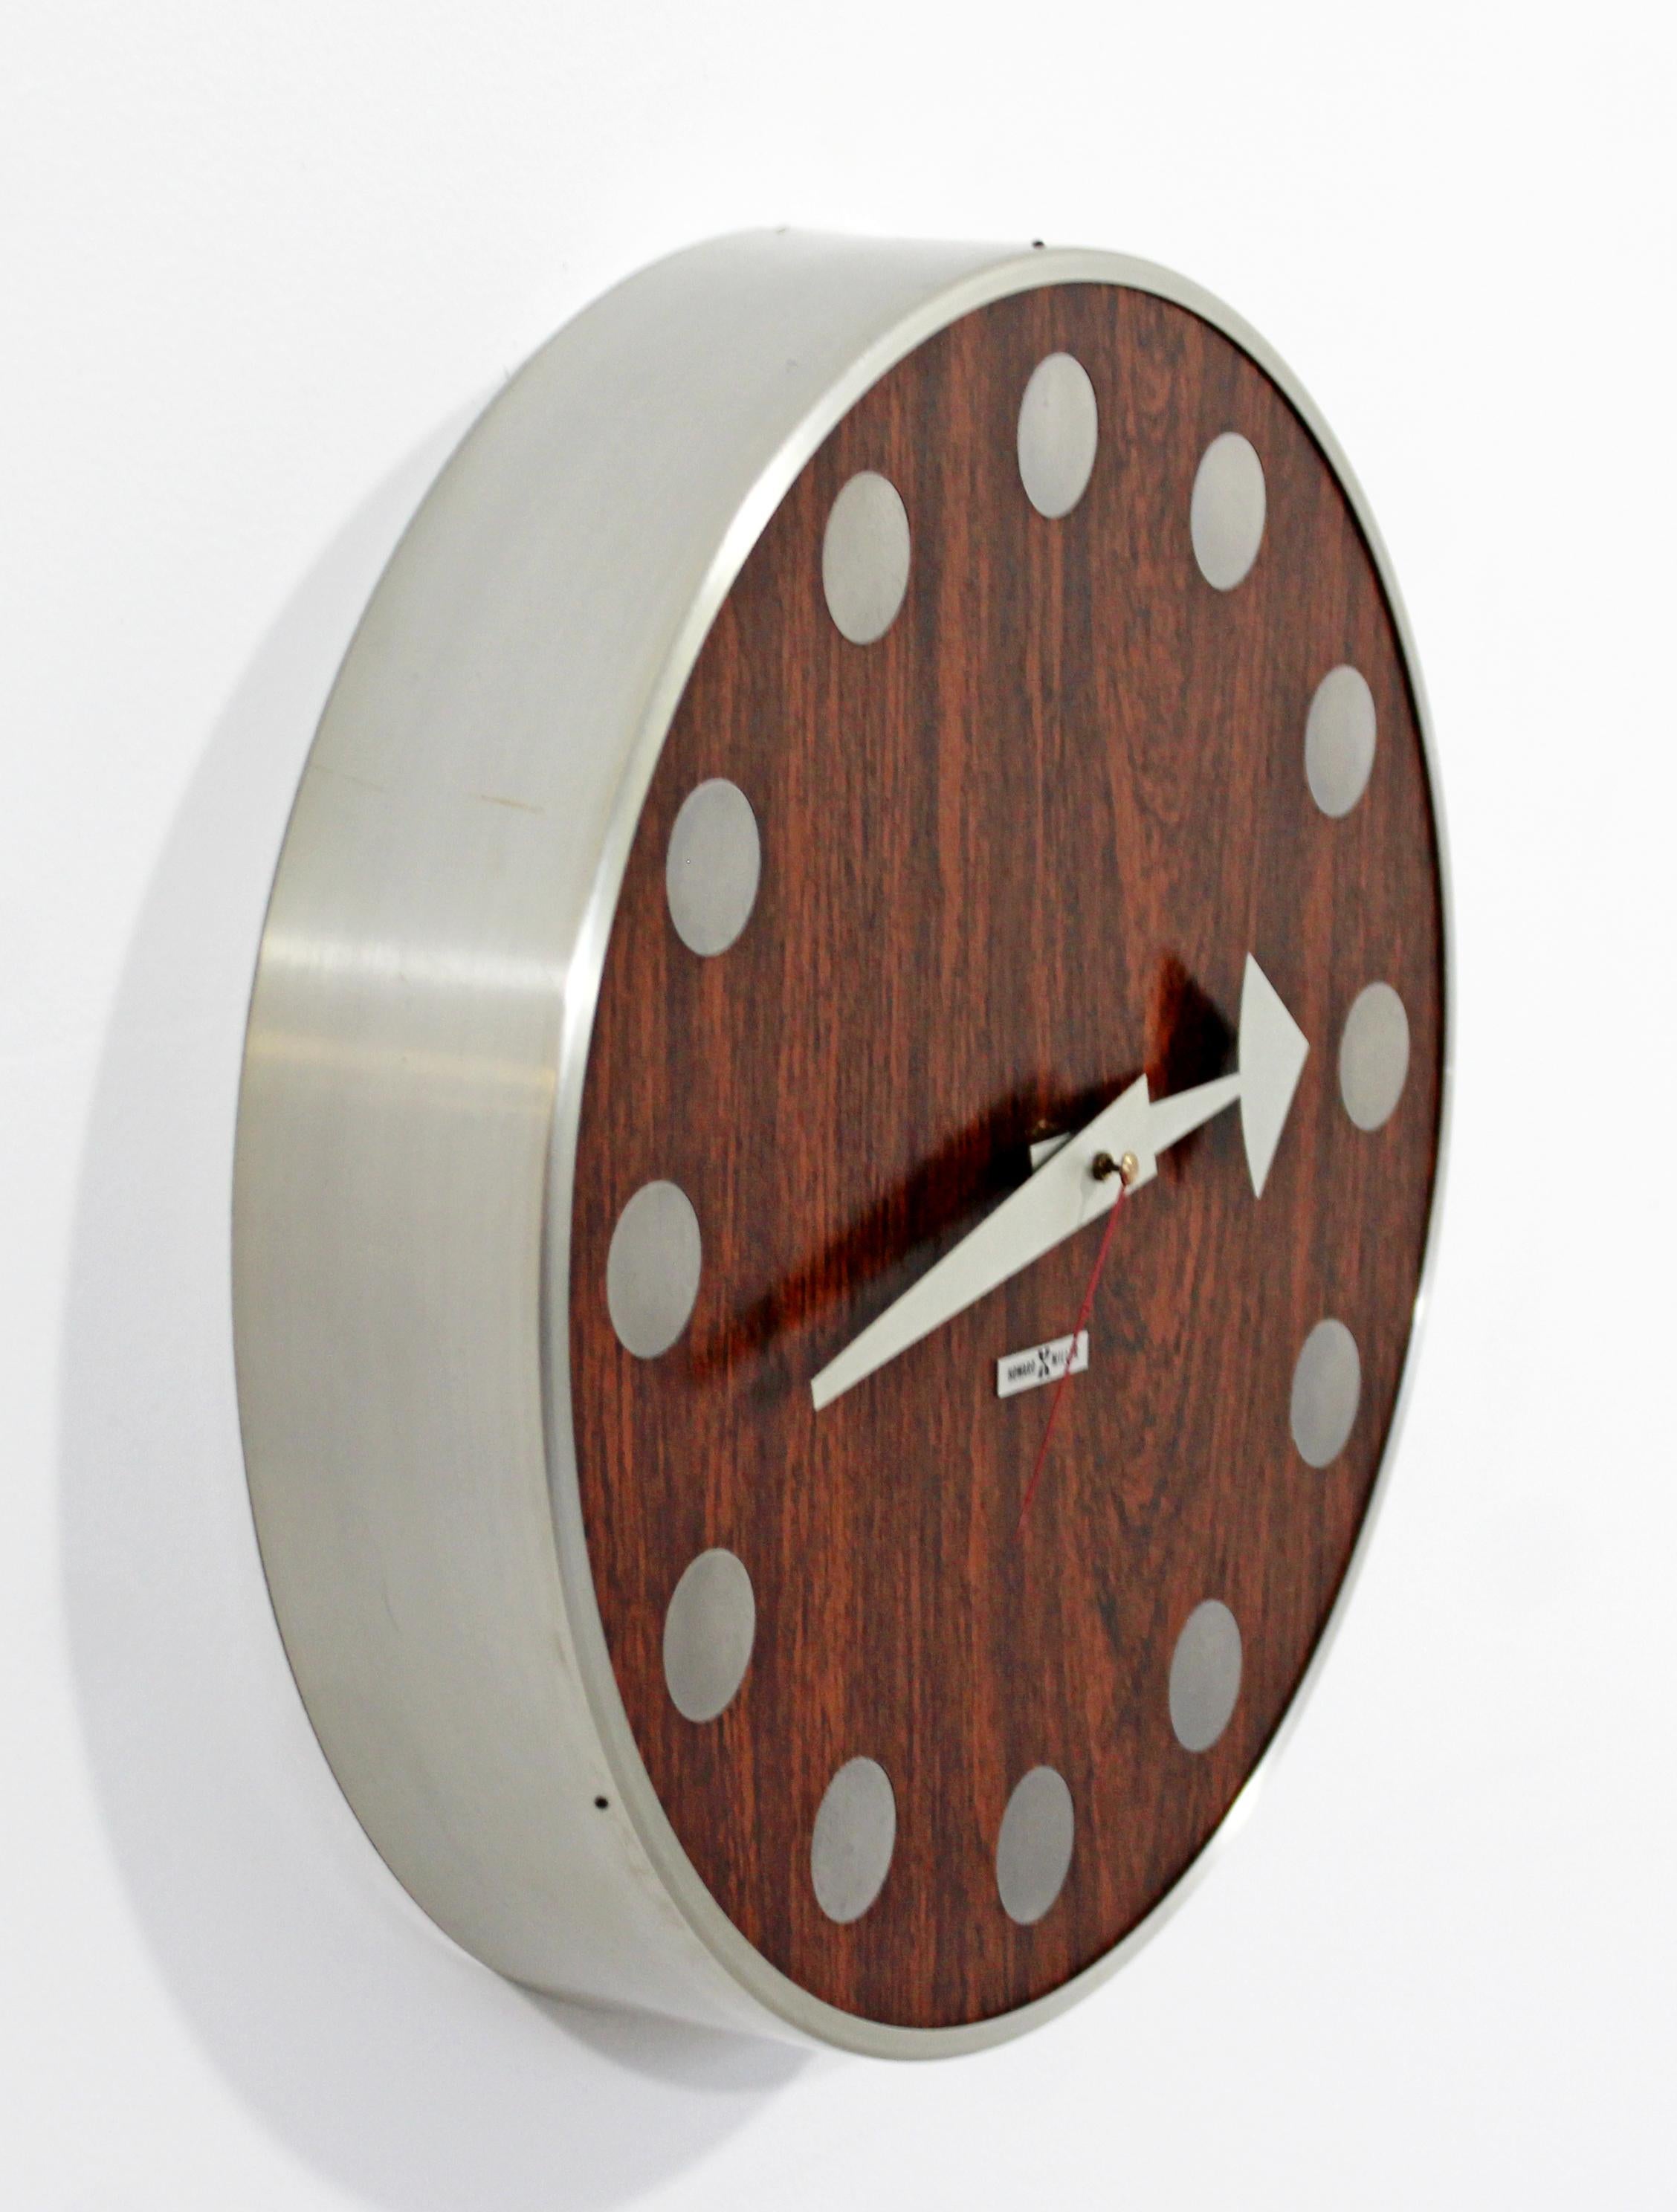 For your consideration is a warm and chic, round wall clock, made of chrome and with a rosewood face, by Arthur Umanoff for Howard Miller, circa 1960s. In excellent condition. The dimensions are 12.5